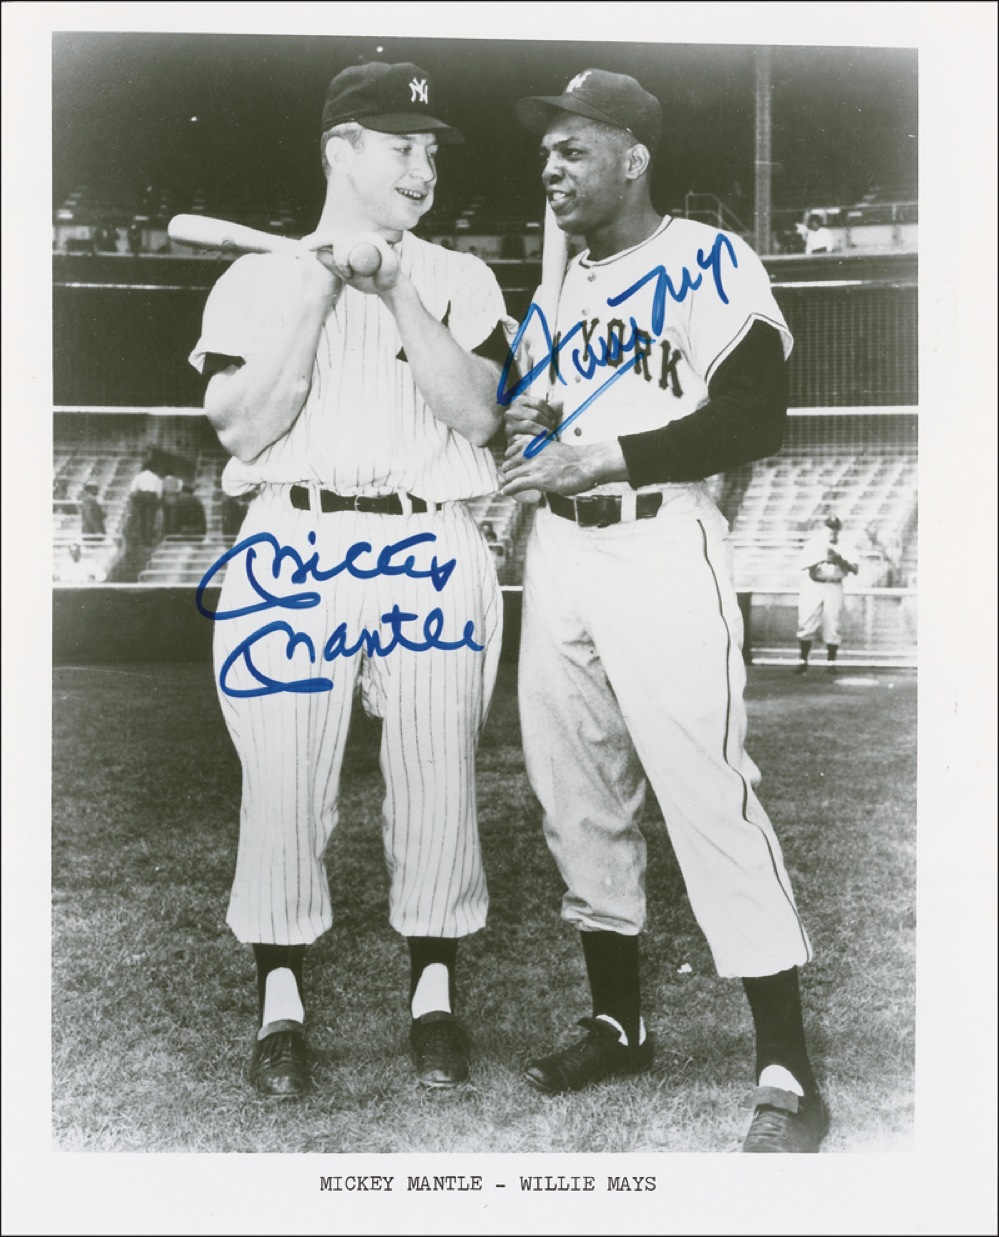 Lot #1280 Mickey Mantle and Willie Mays